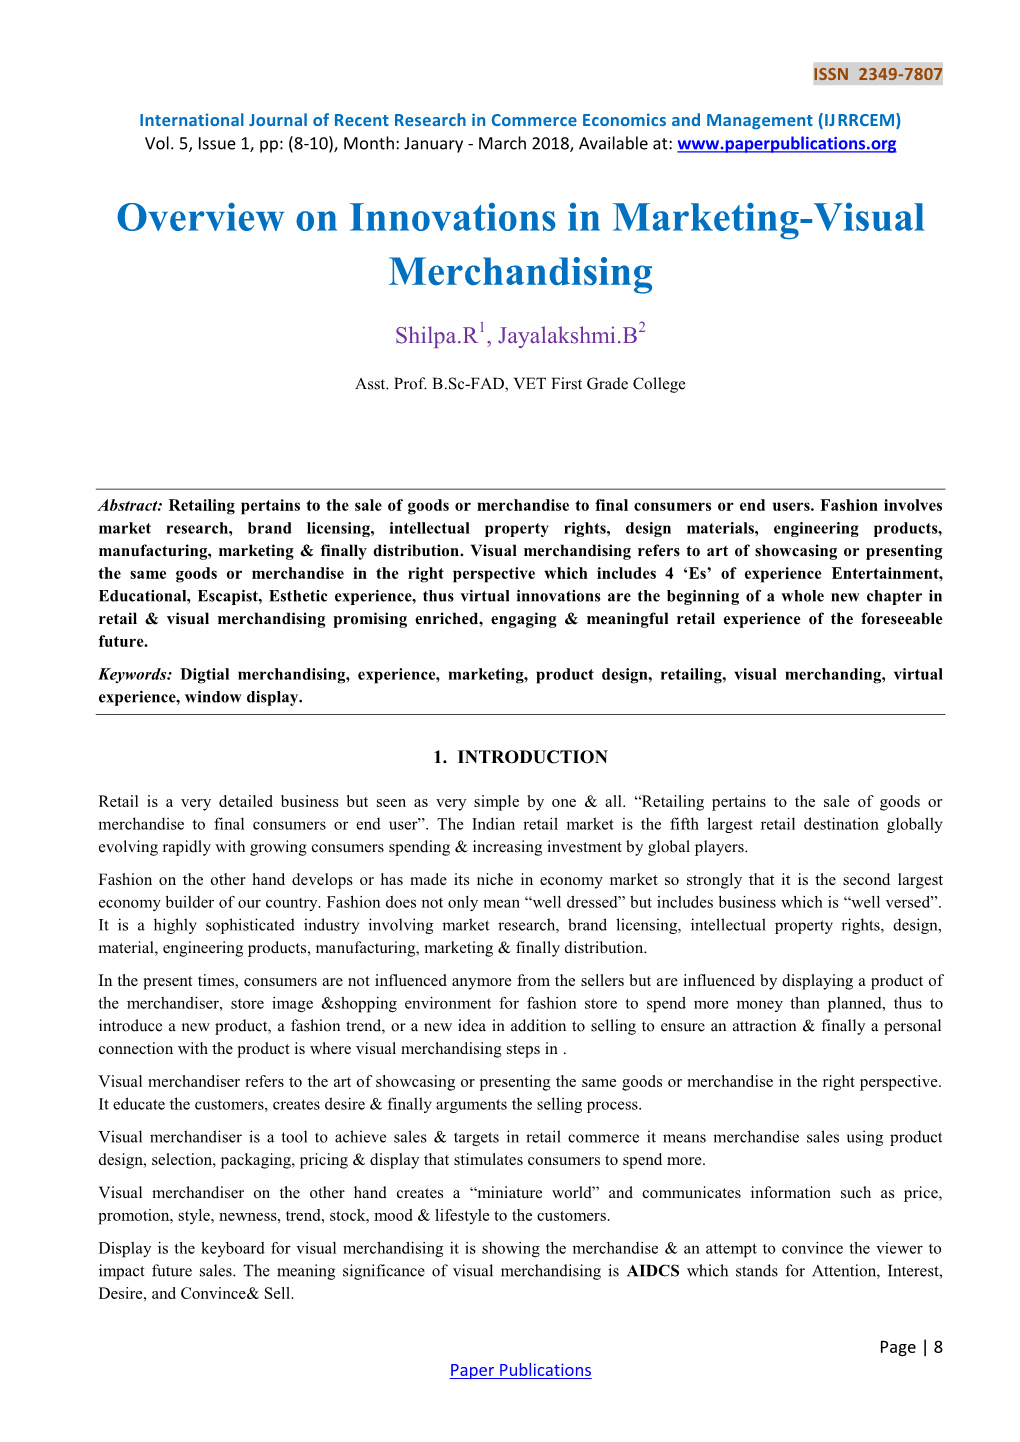 Overview on Innovations in Marketing-Visual Merchandising